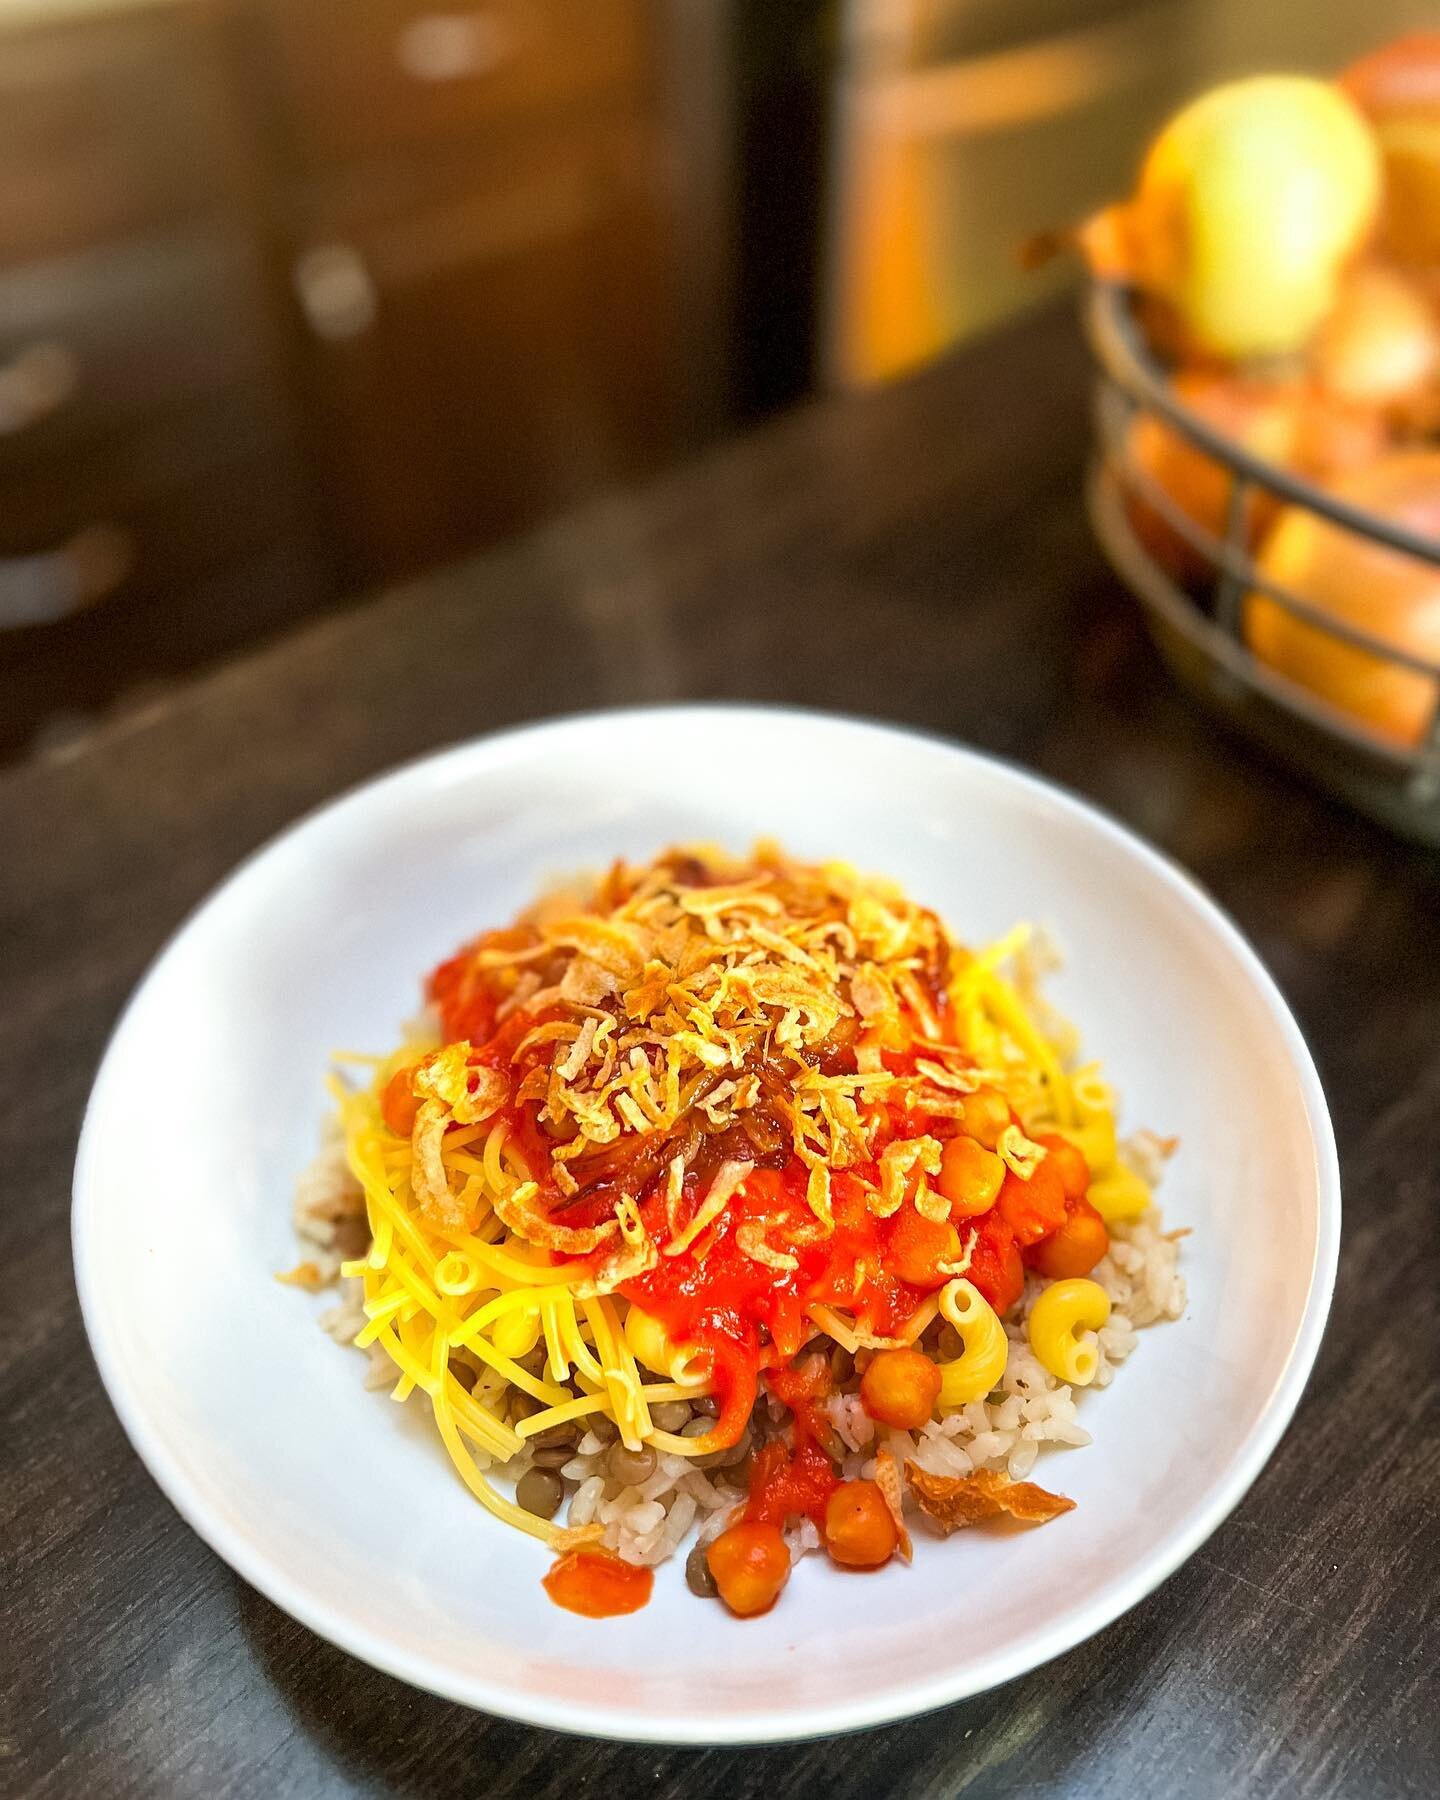 Koshari - or rather, my gluten free attempt. 

The national dish of Egypt, this carb loaded, vegan meal is delicious, a little tangy and spicy, and an absolute delight. 

Rice, pasta and lentils, along with chickpeas in a spicy tomato sauce, topped w